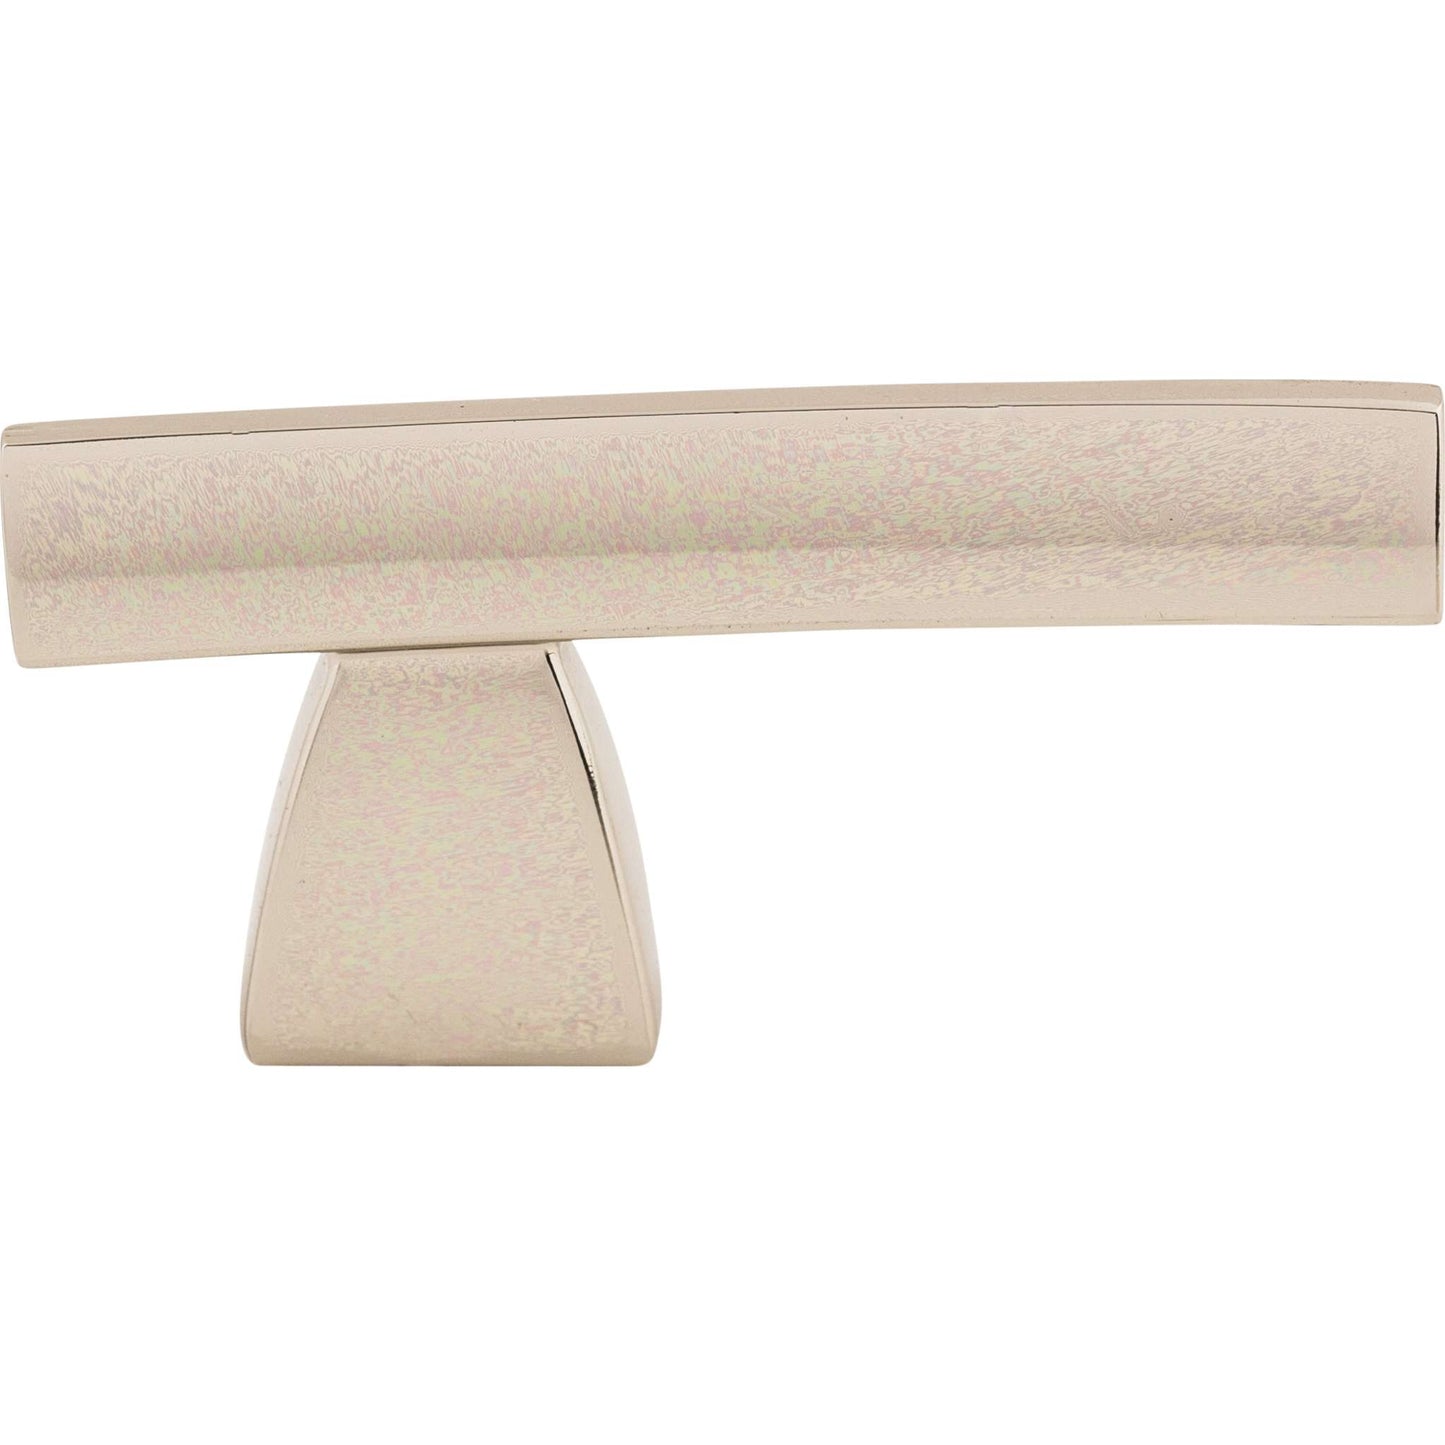 Top Knobs - Arched Knob/Pull